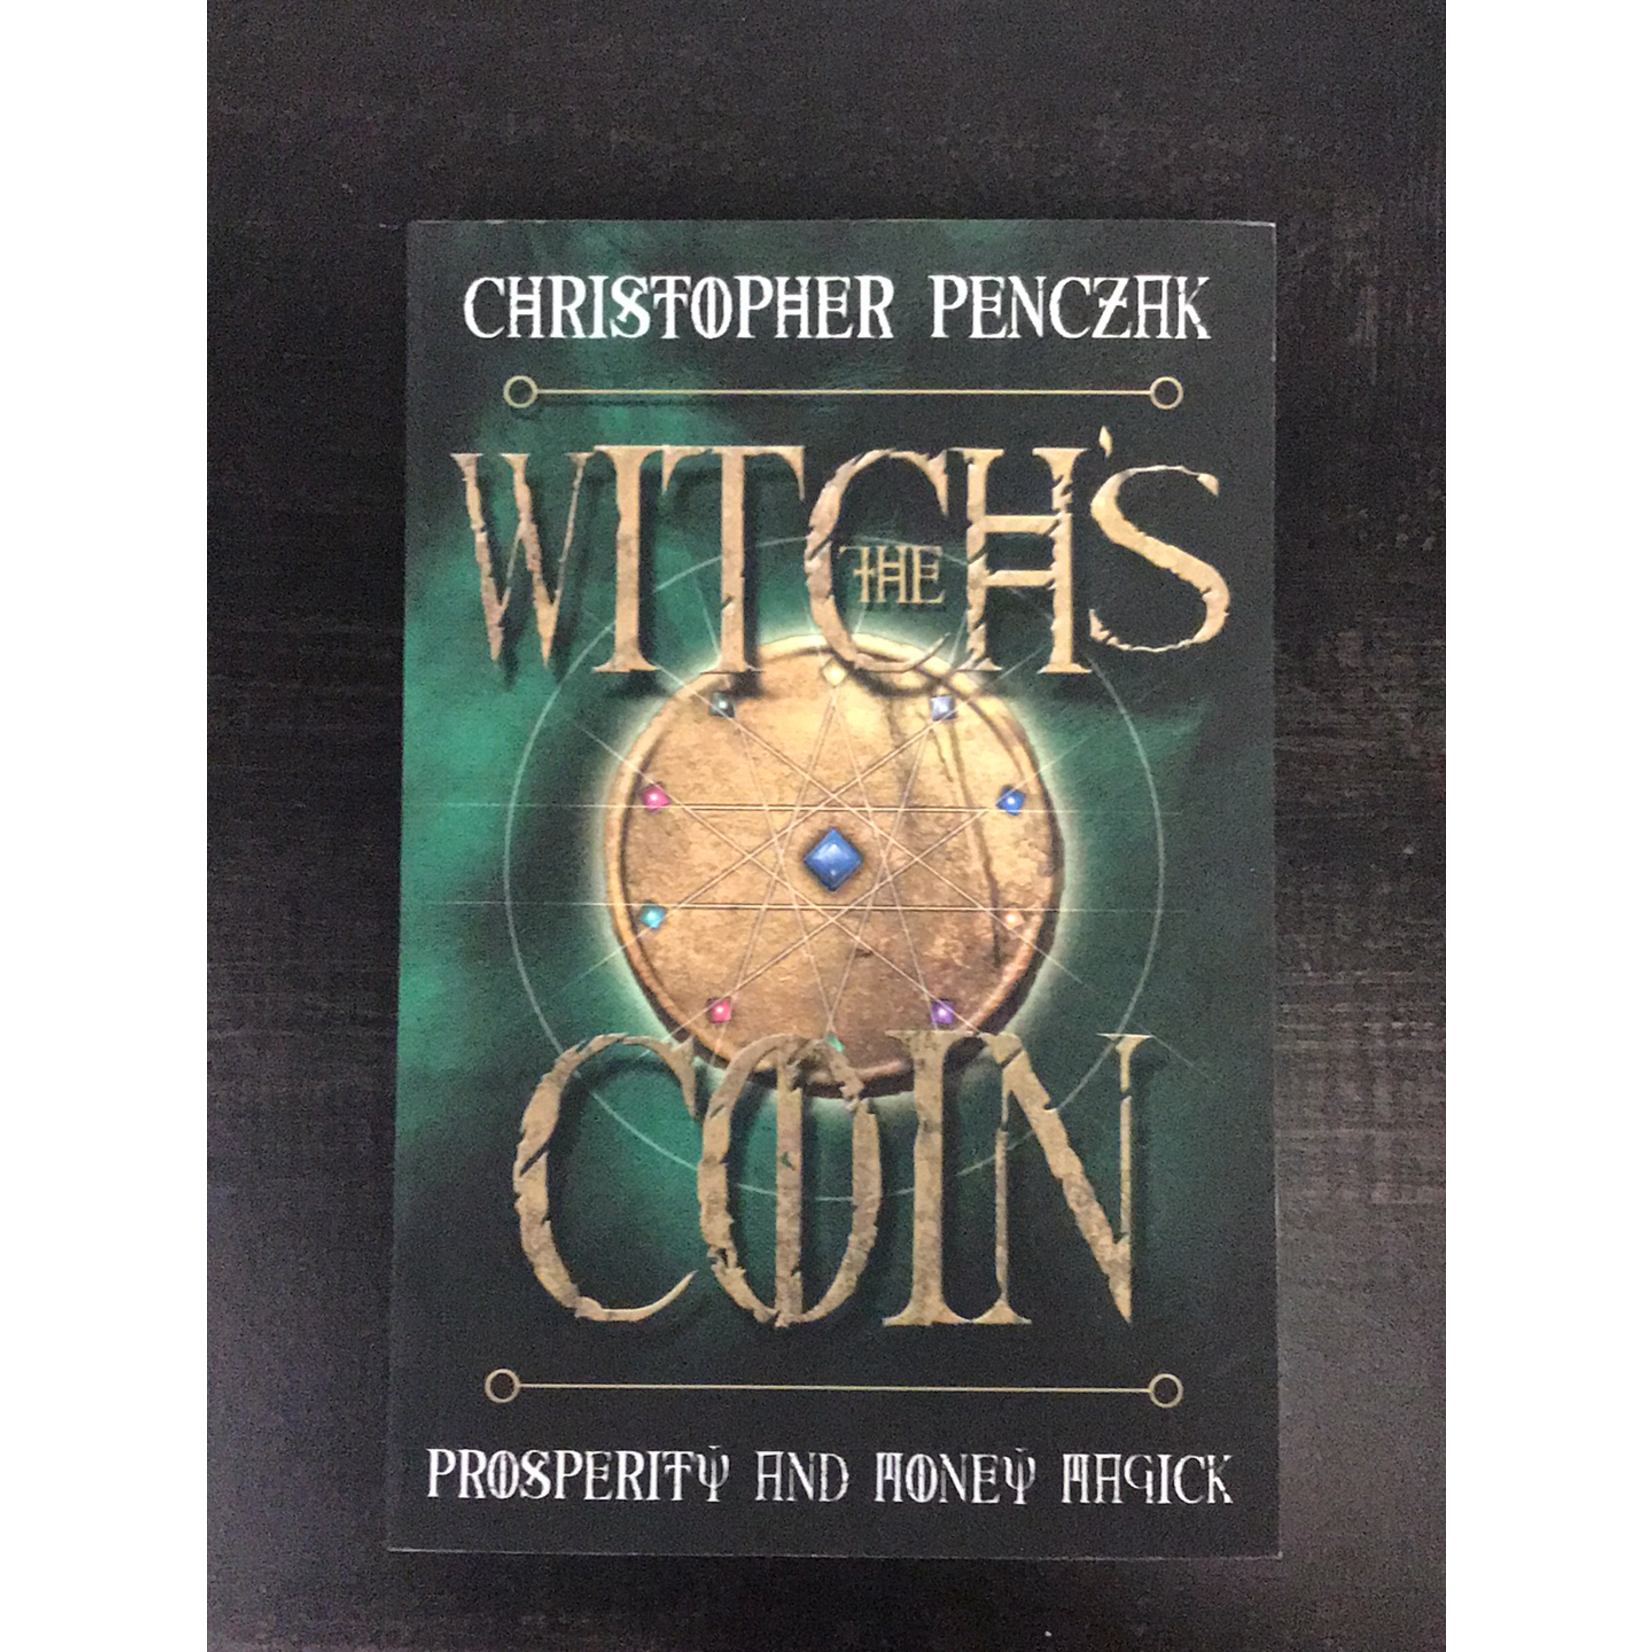 The Witch's Coin - Christopher Penczak